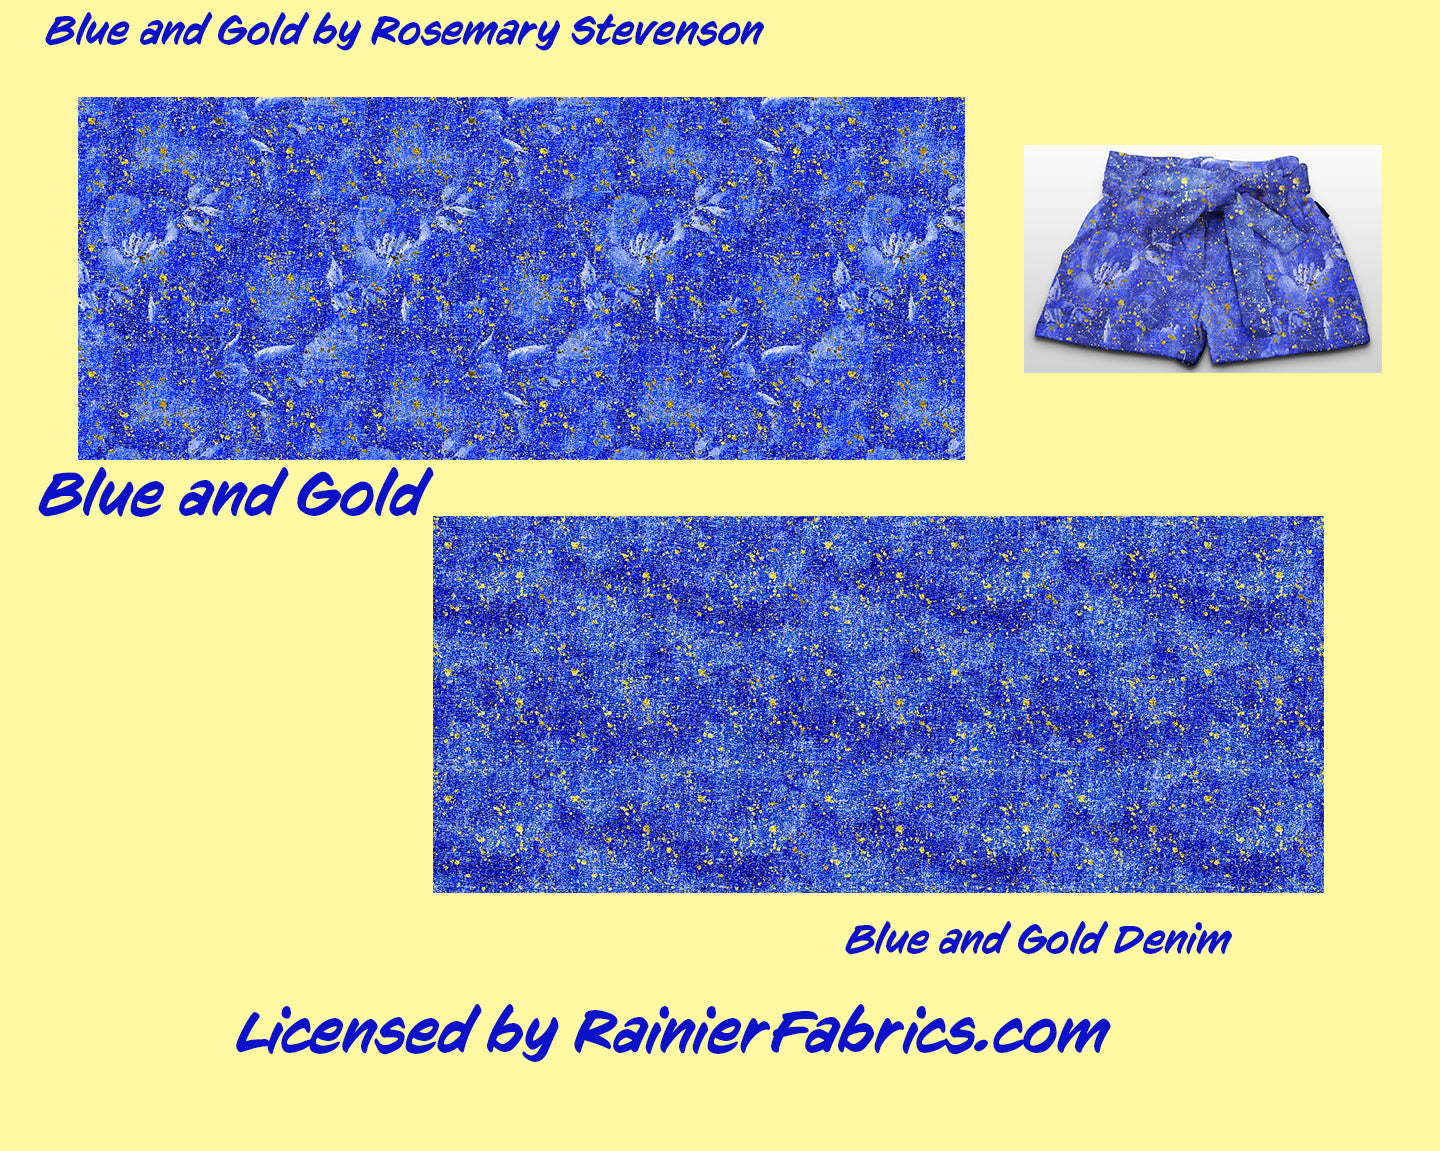 Blue and Gold from Rosemary Stevenson  - 2-5 day turnaround - Order by 1/2 yard; Description of bases below